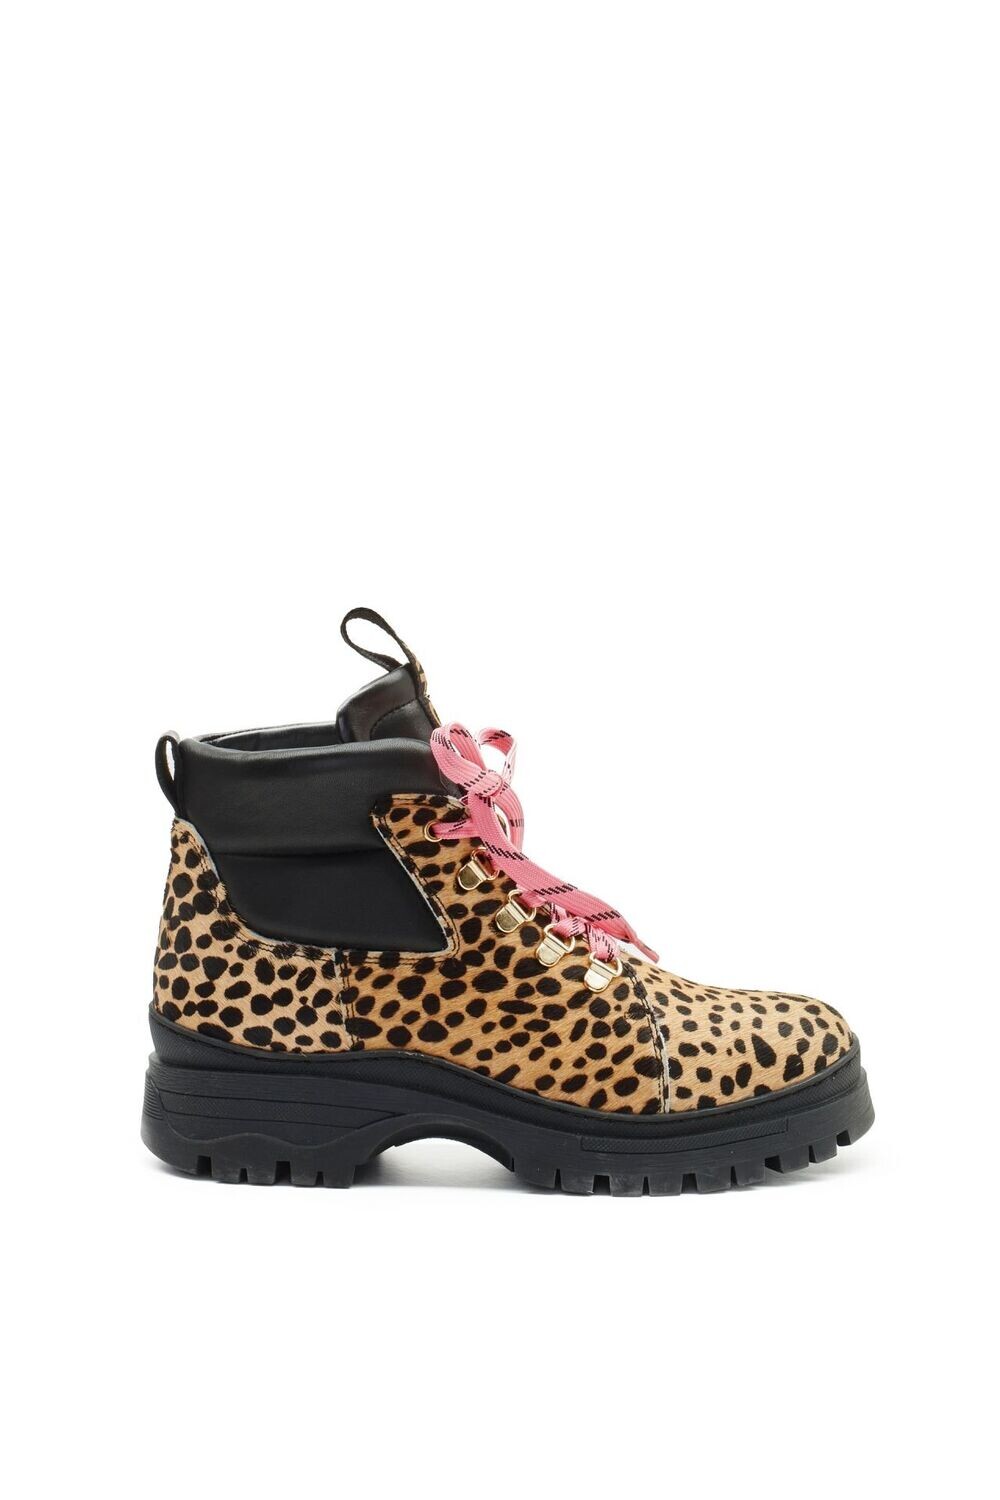 Fabienne Chapot Leopard Printed Lindsey Boots